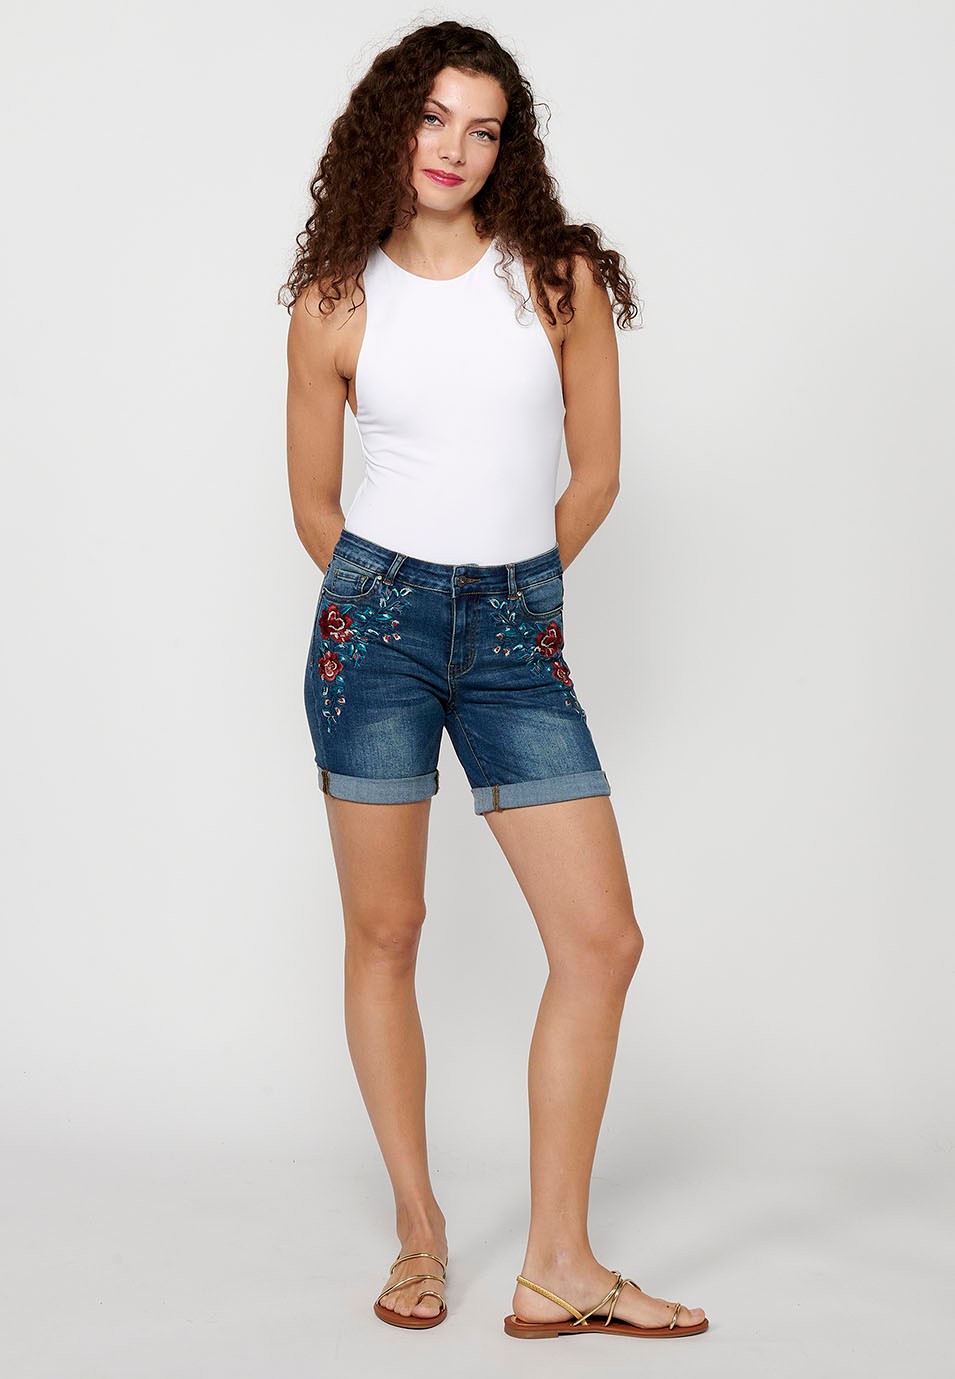 Denim shorts with front zipper and button closure and front floral embroidered details with five pockets, one pocket pocket, Dark Blue for Women